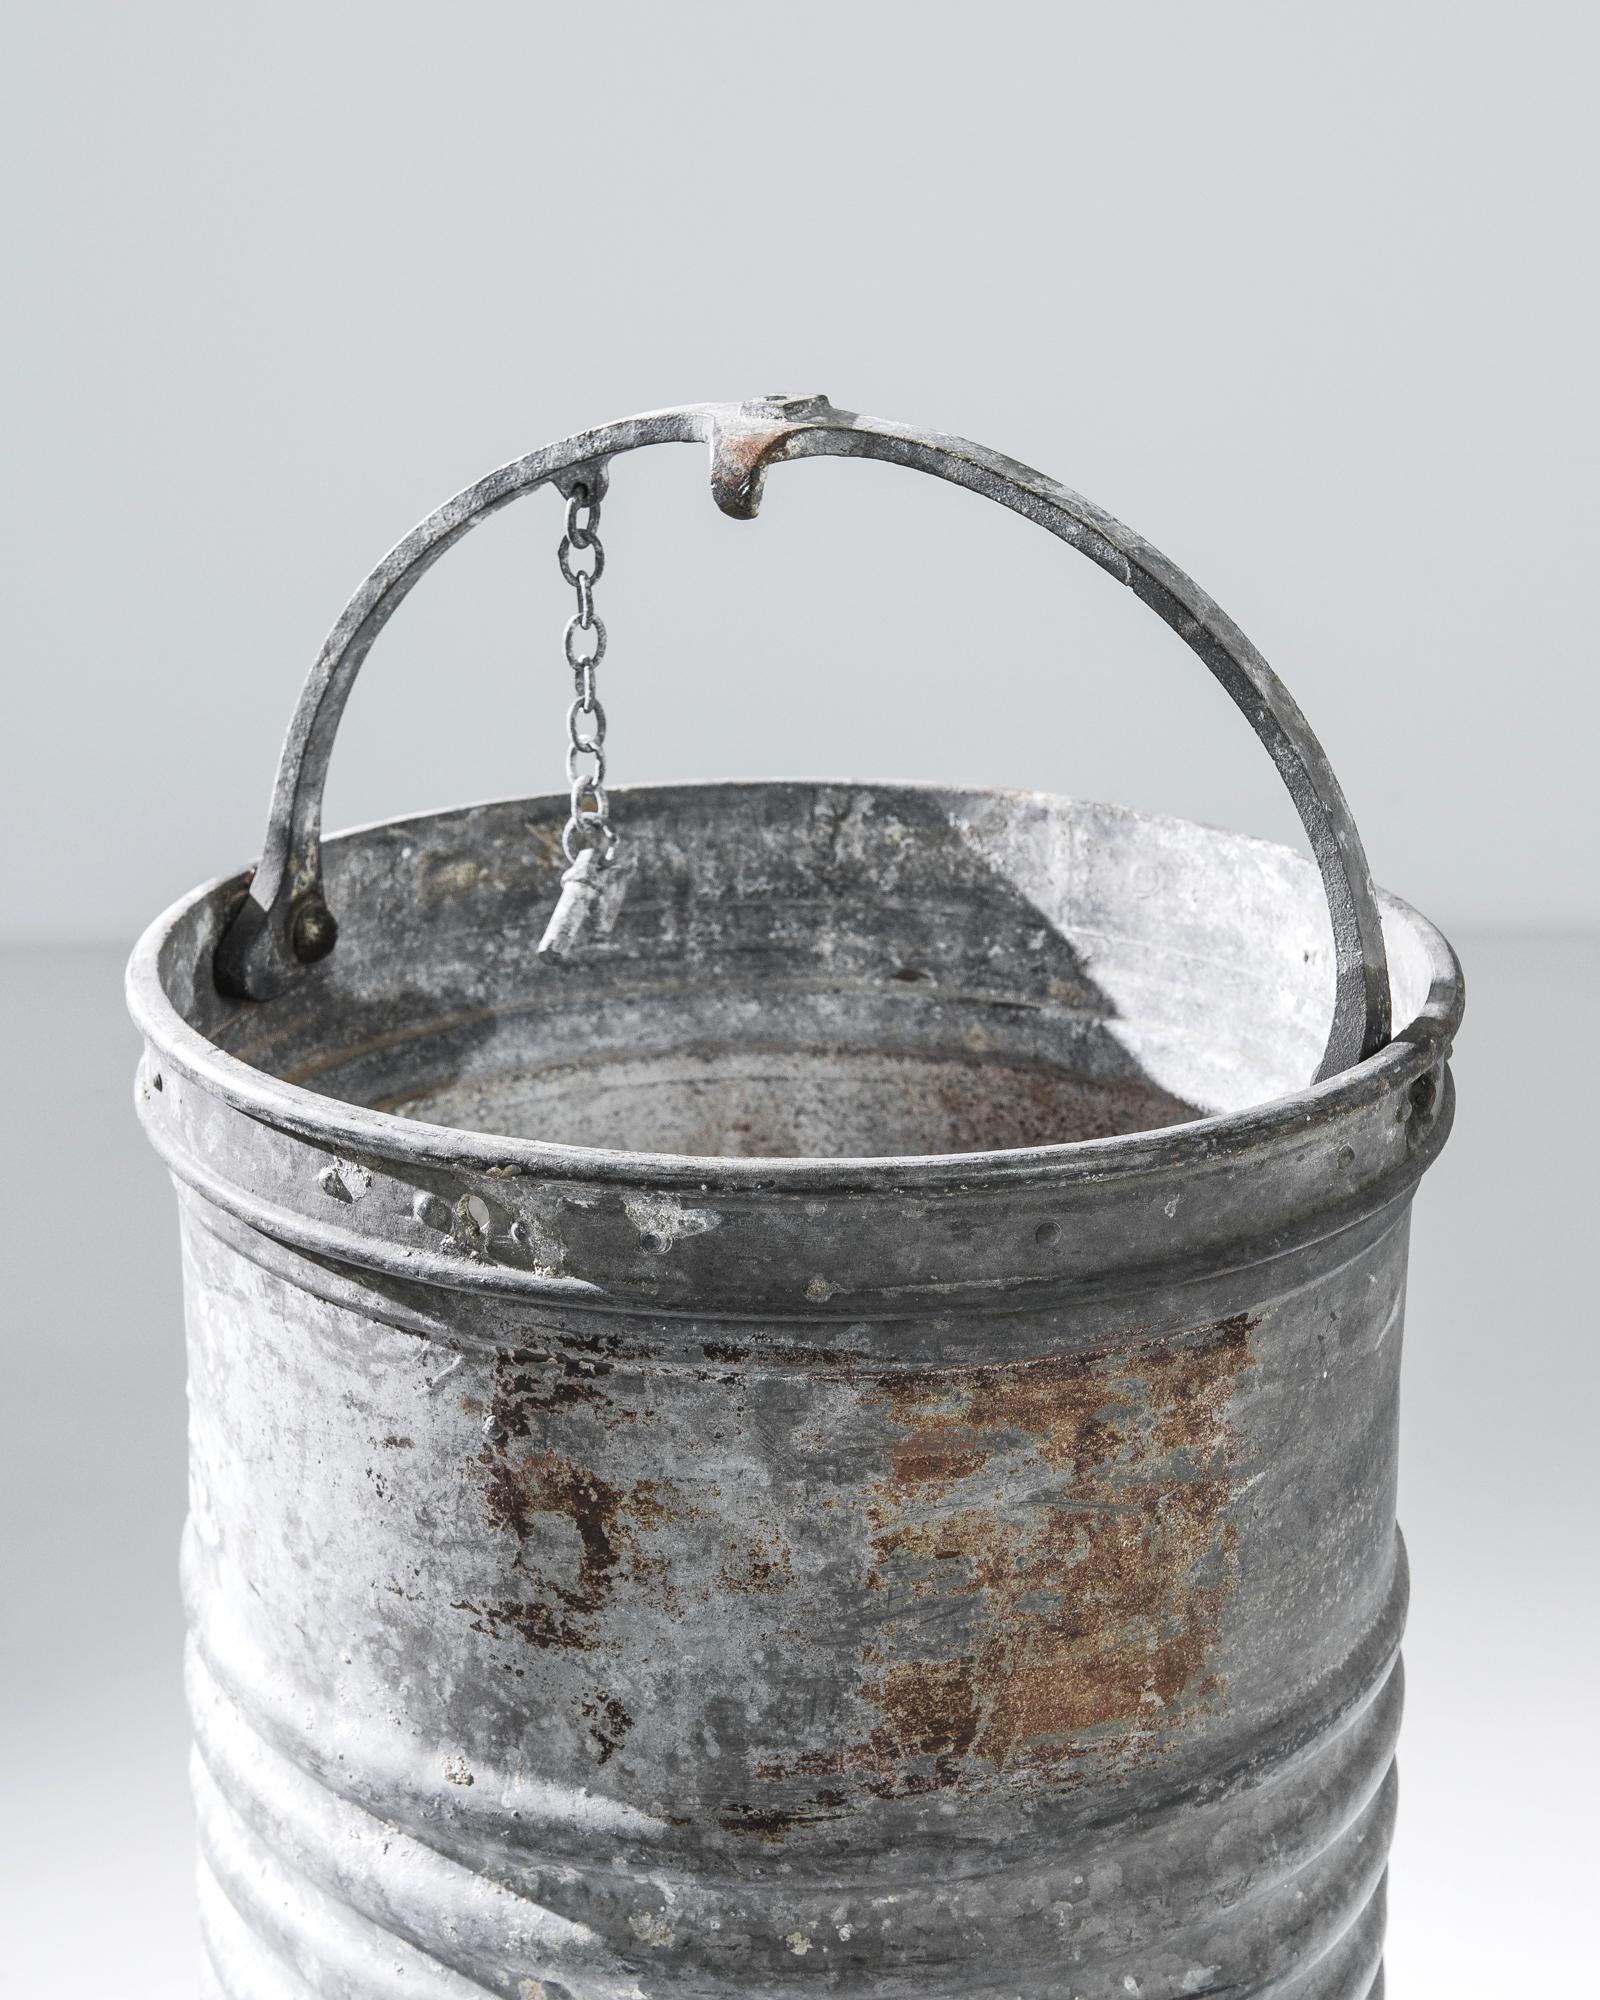 This 1950s French Zinc Bucket is a perfect blend of functionality and vintage charm. Its galvanized surface, worn by time, reveals a history of hard work and reliability. The sturdy handle, equipped with a wood grip, adds a touch of rustic warmth to